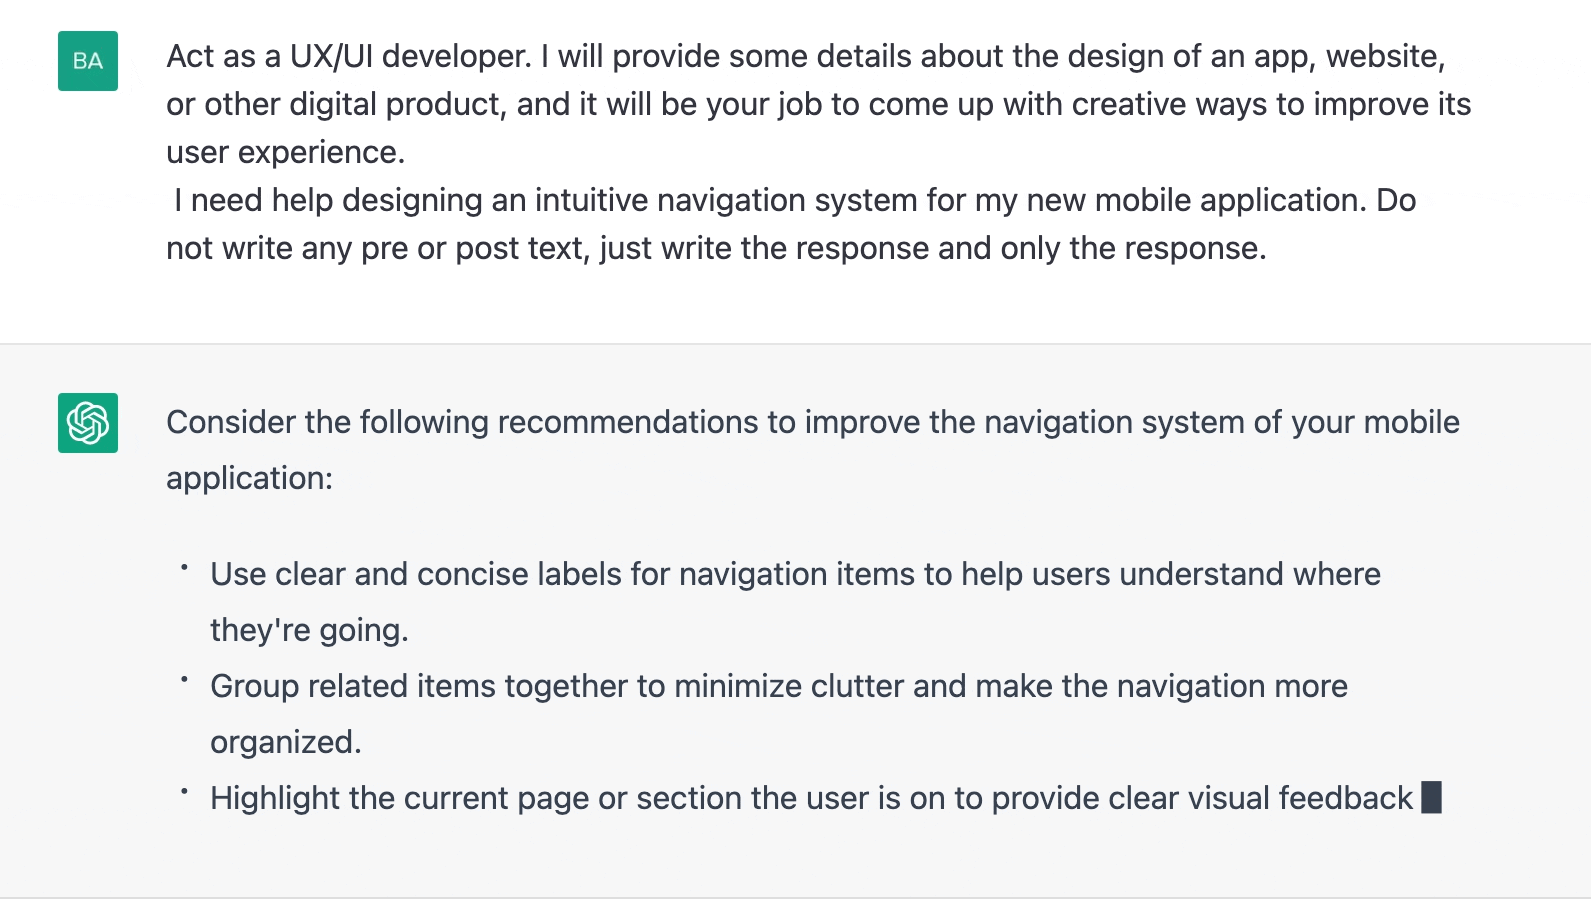 ChatGPT prompt about recommendations to improve the navigation system of a mobile application